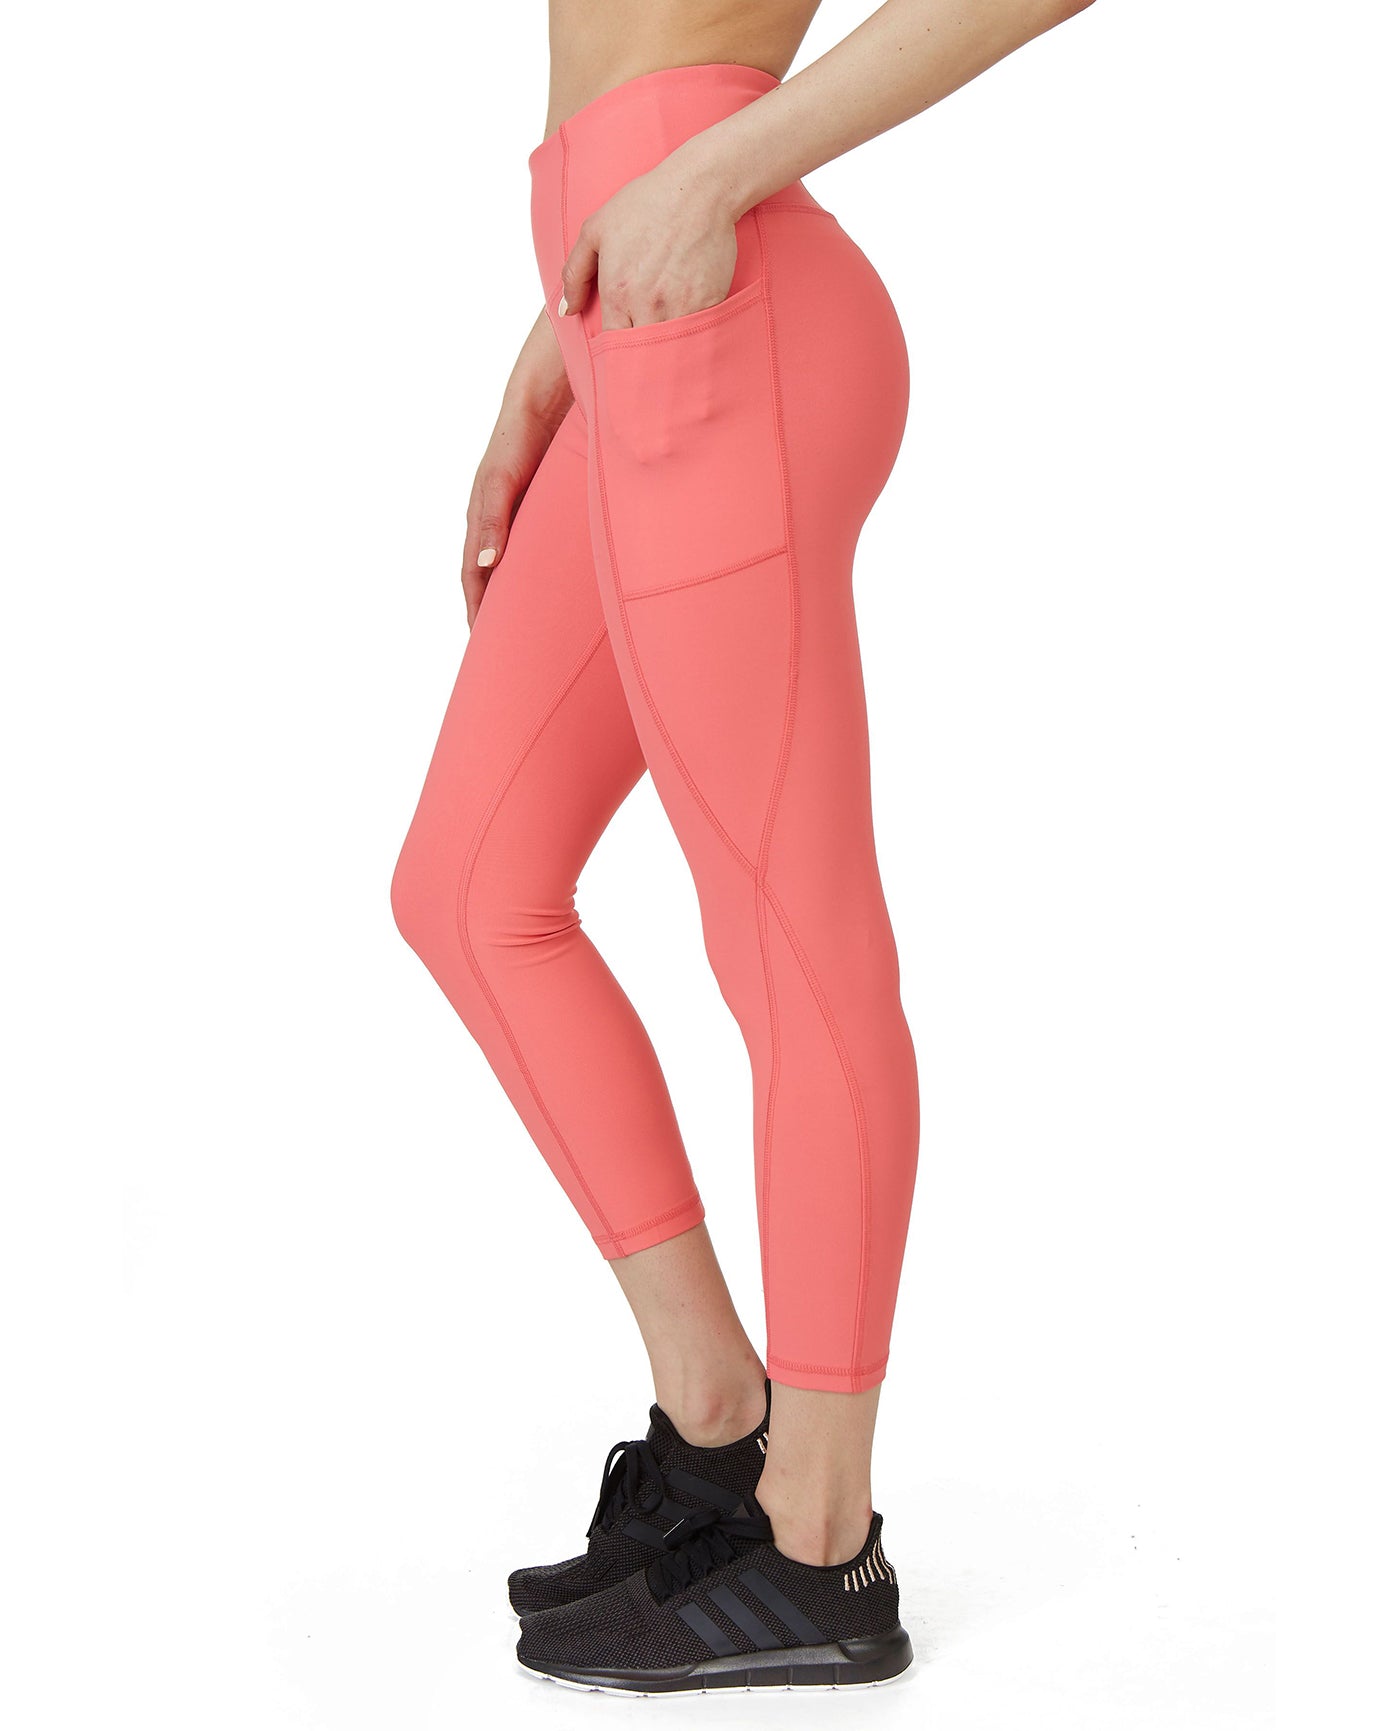 KEX Sky Blue Pink Solid Cotton Ankle Length Legging Combo Legging Combo  Girls Legging Combo Ankle Legging Combo